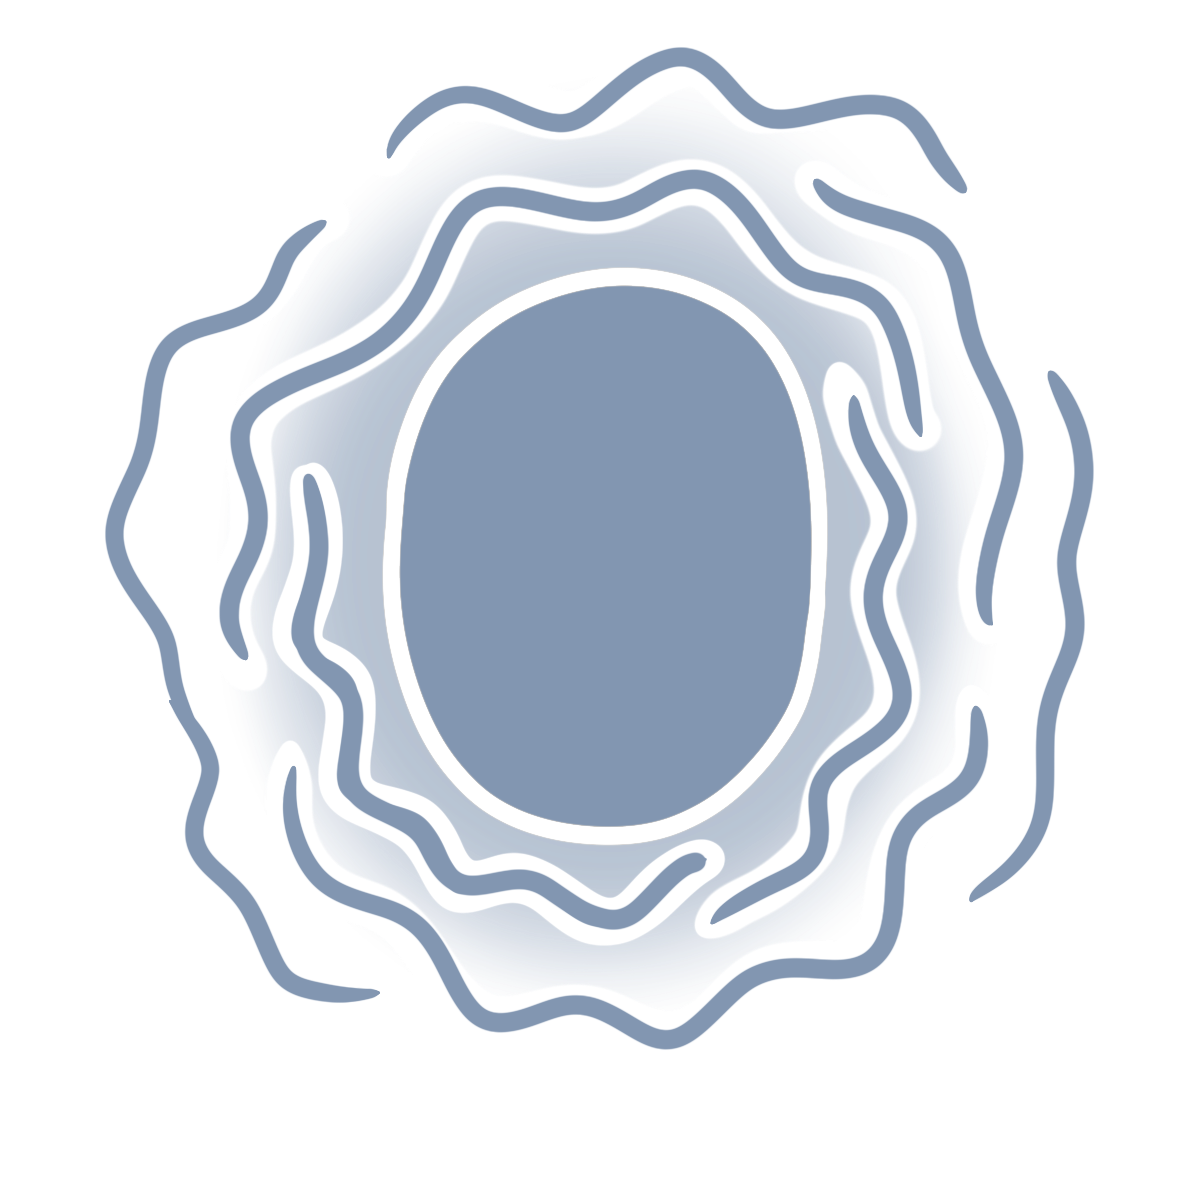 A light blue glowing oval surrounded by squiggly lines.